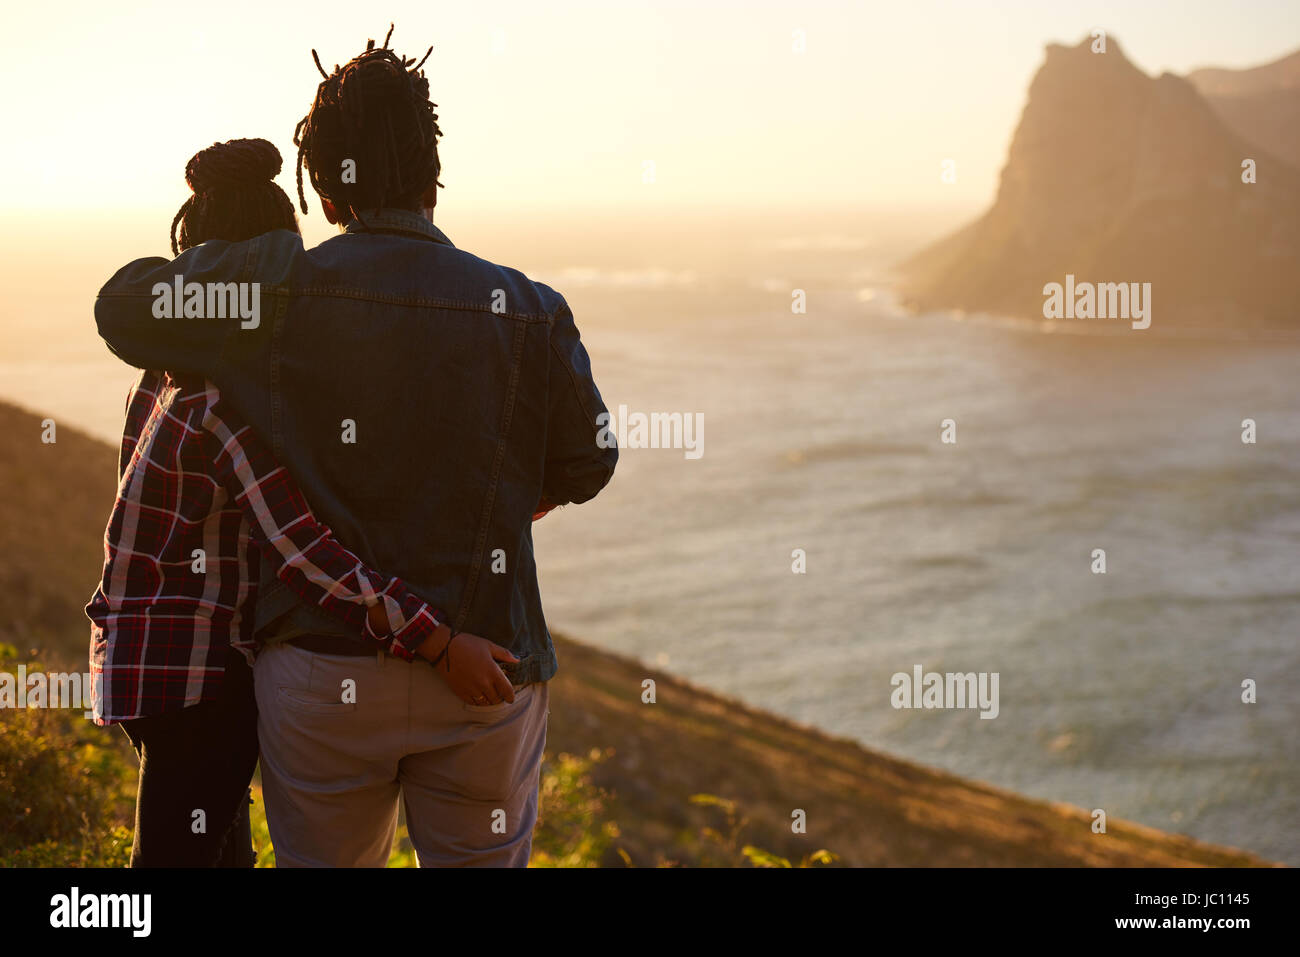 Mixed race couple standing together watching the view from behind Stock Photo